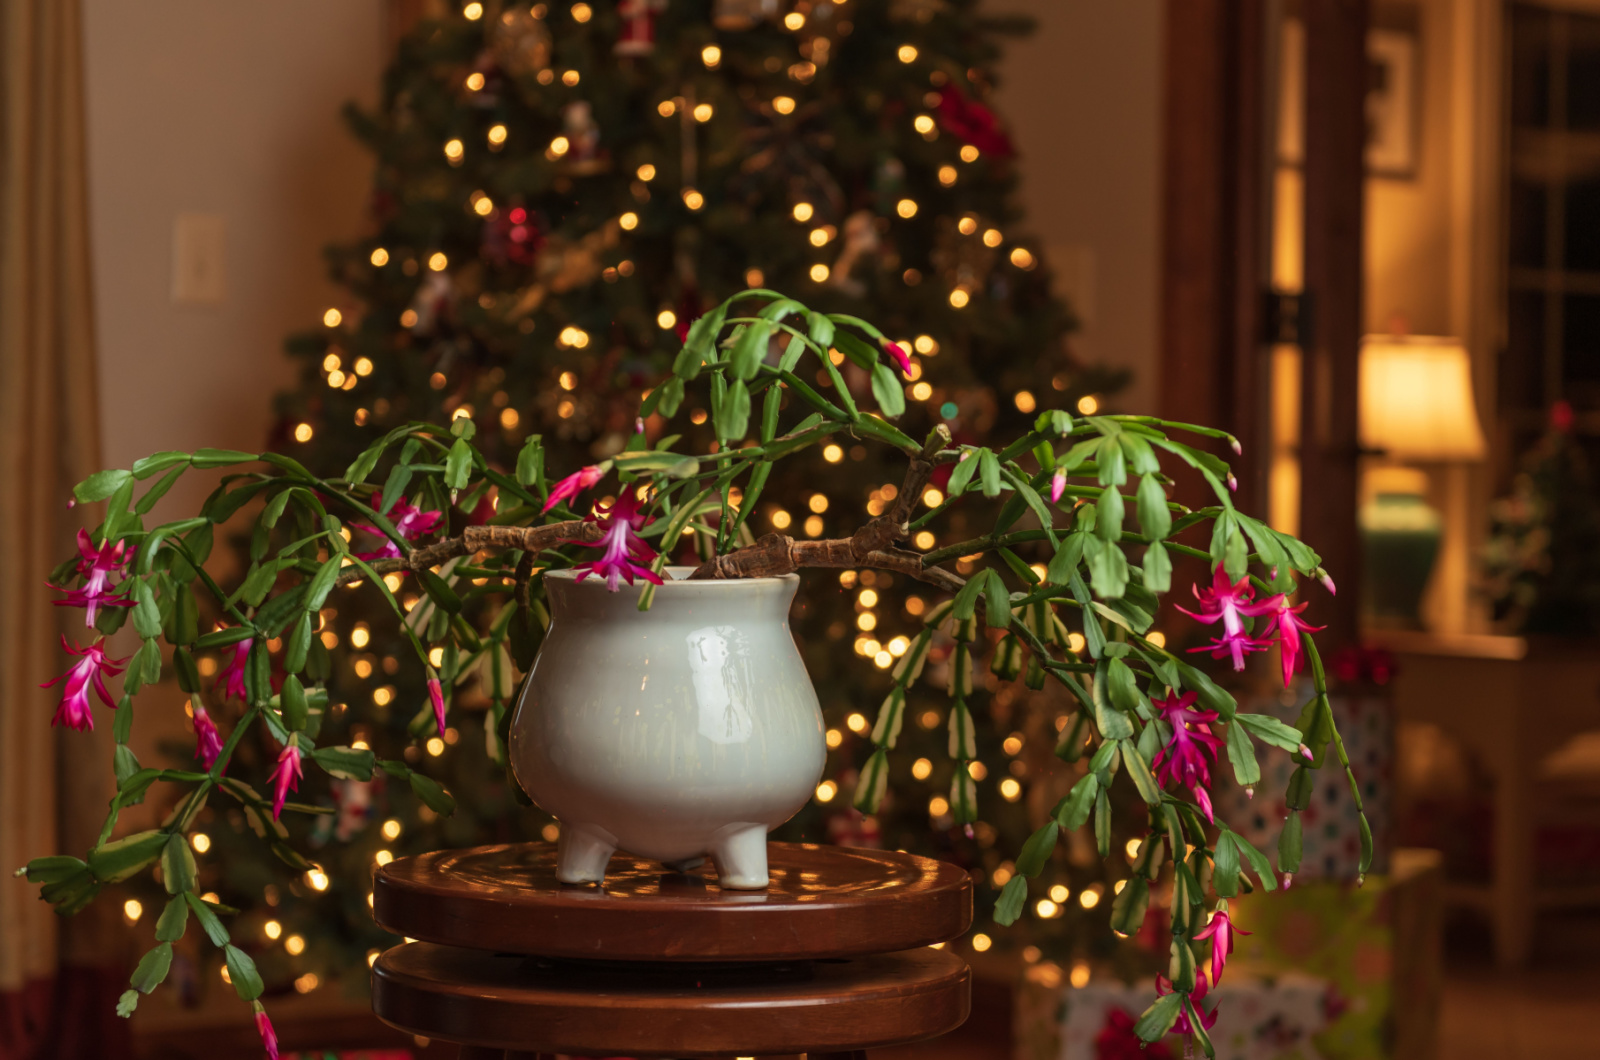 Christmas Cactus in pot in front of Christmas tree